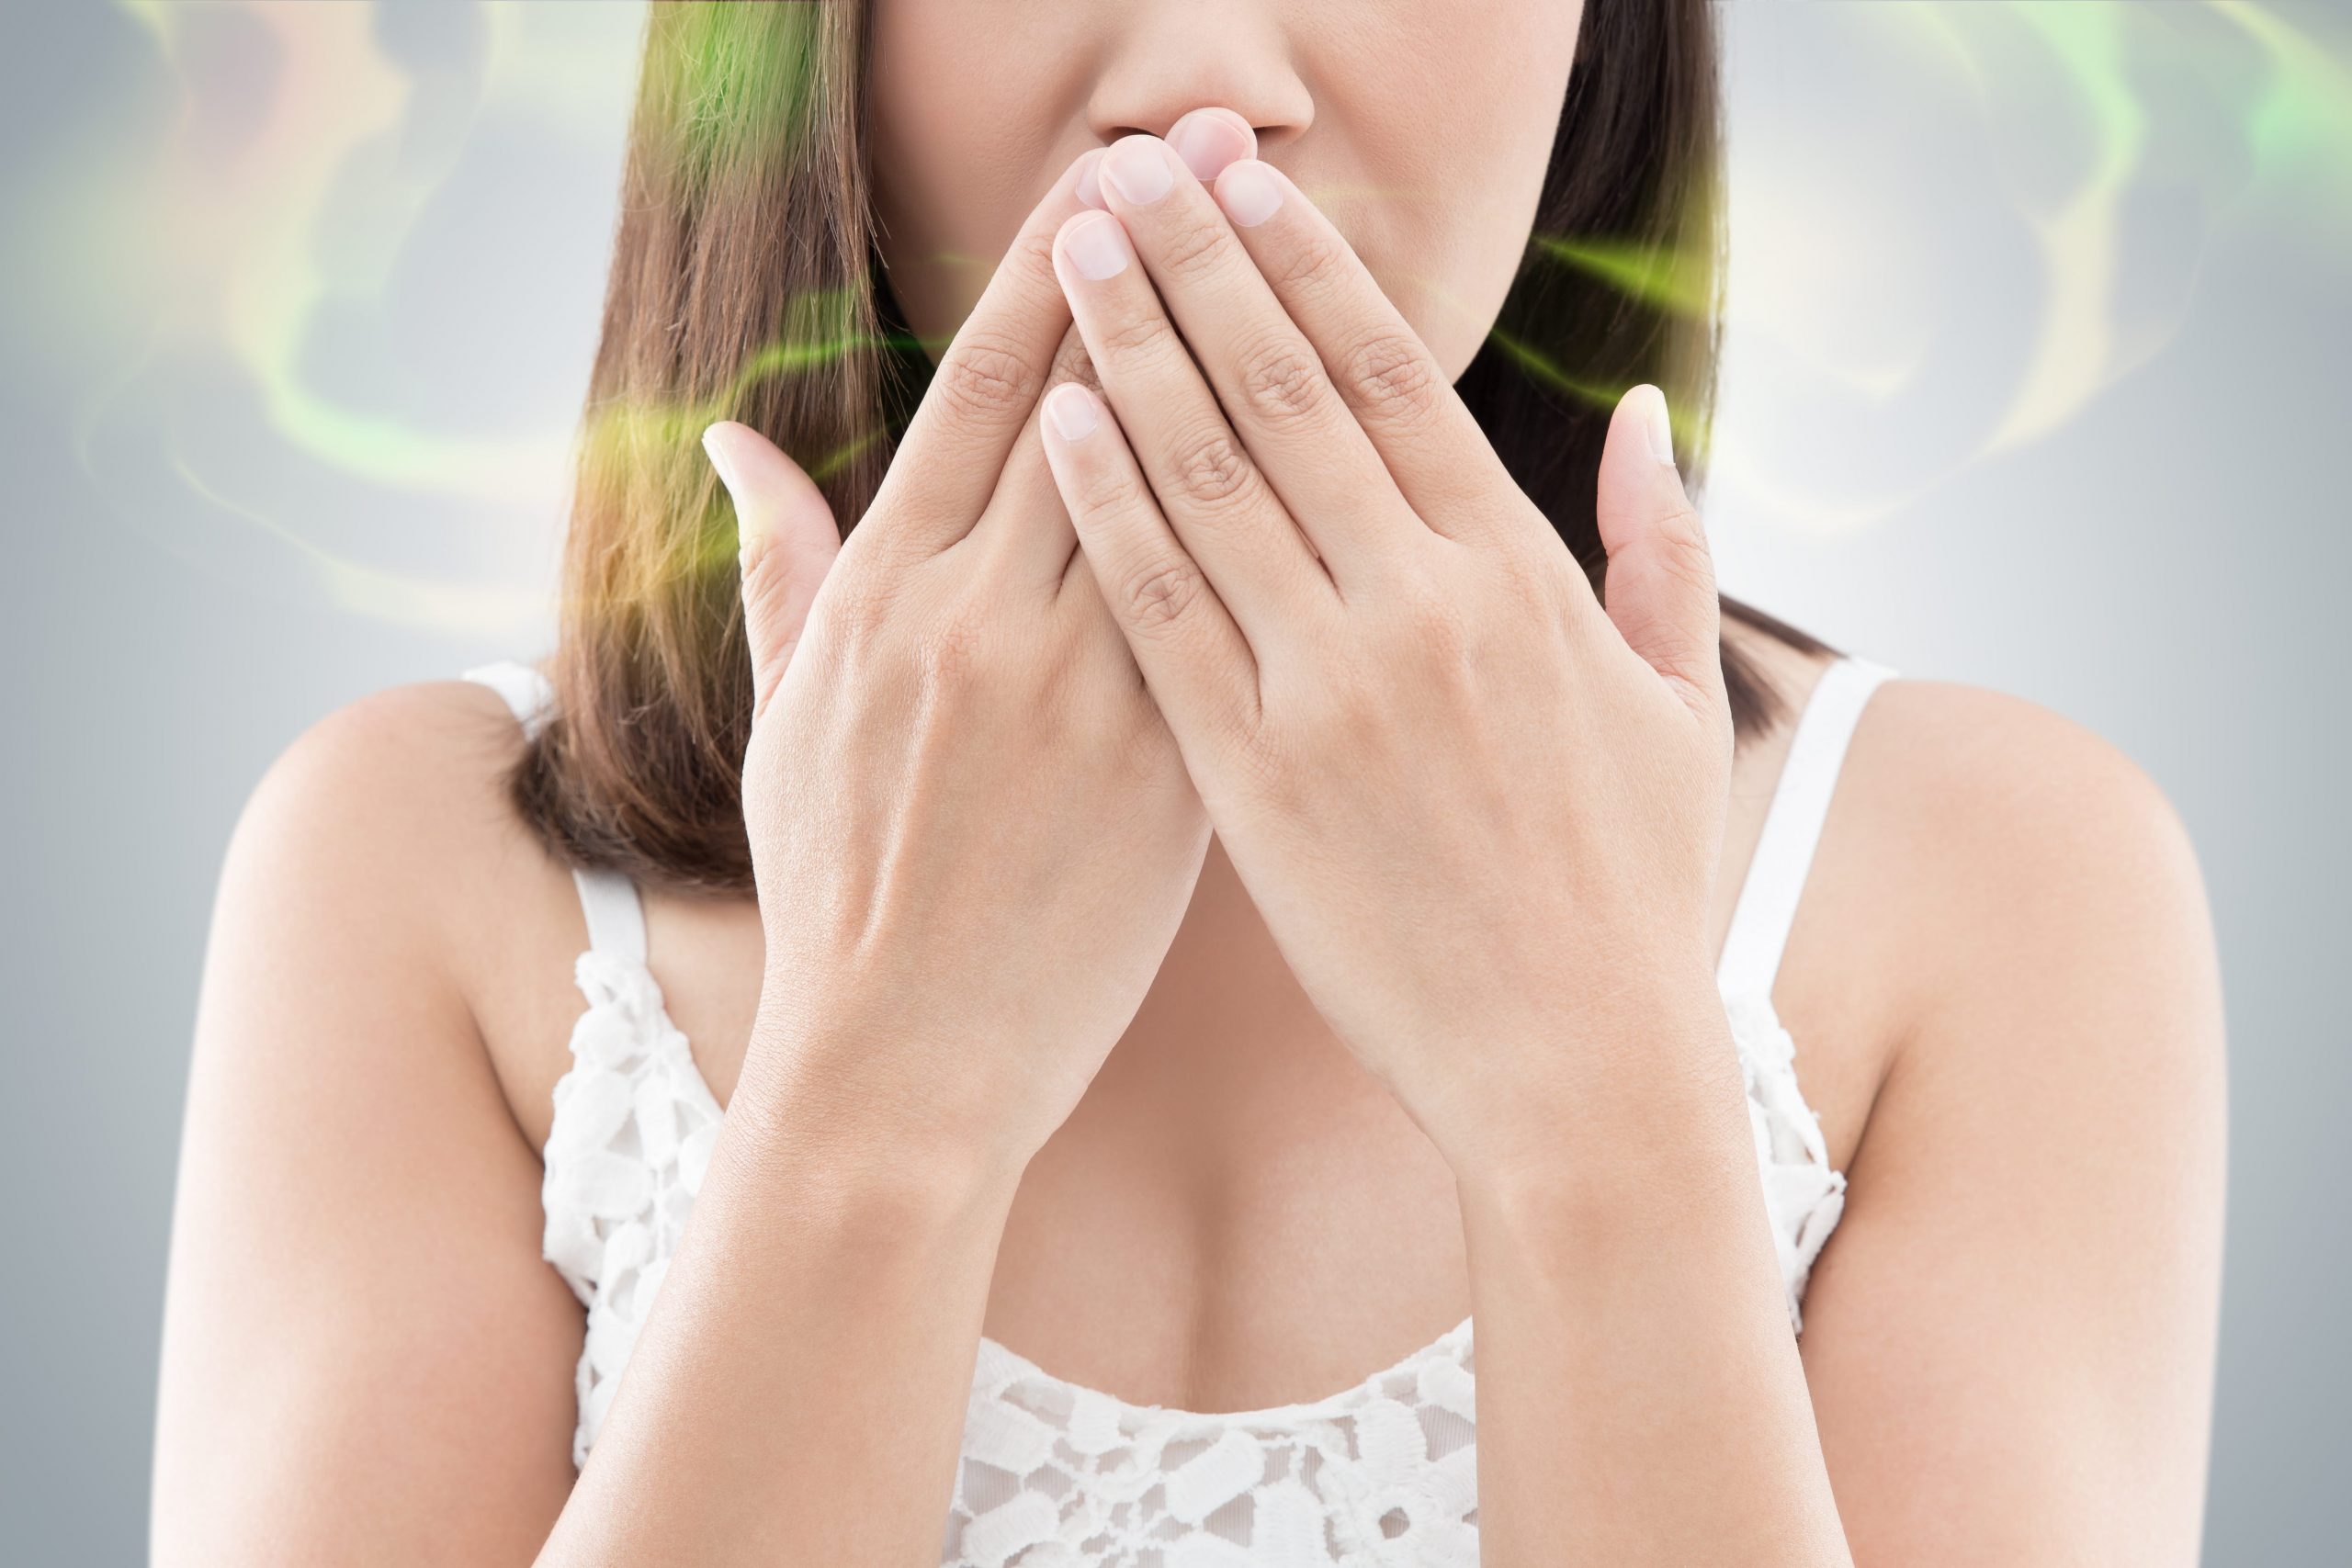 Is Bad Breath a Sign of a more Serious Dental Problem?